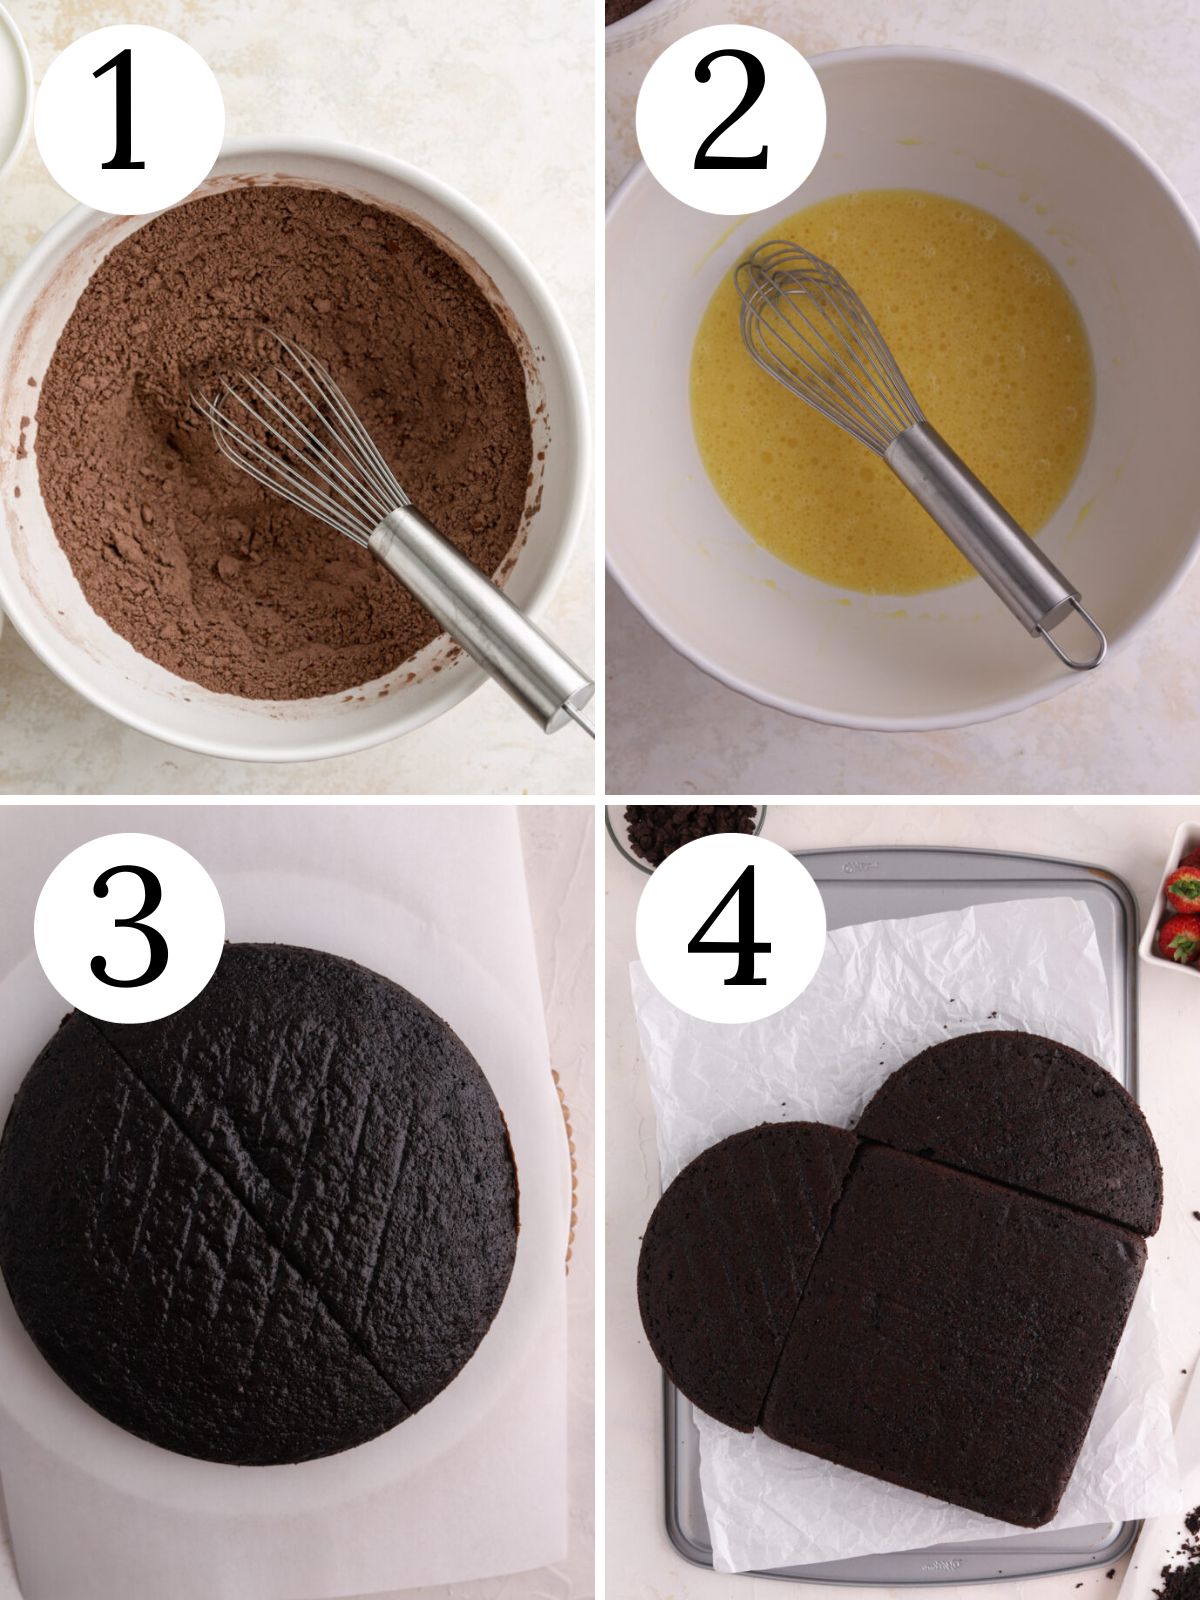 A four photo collage showing how to make a chocolate heart cake. 